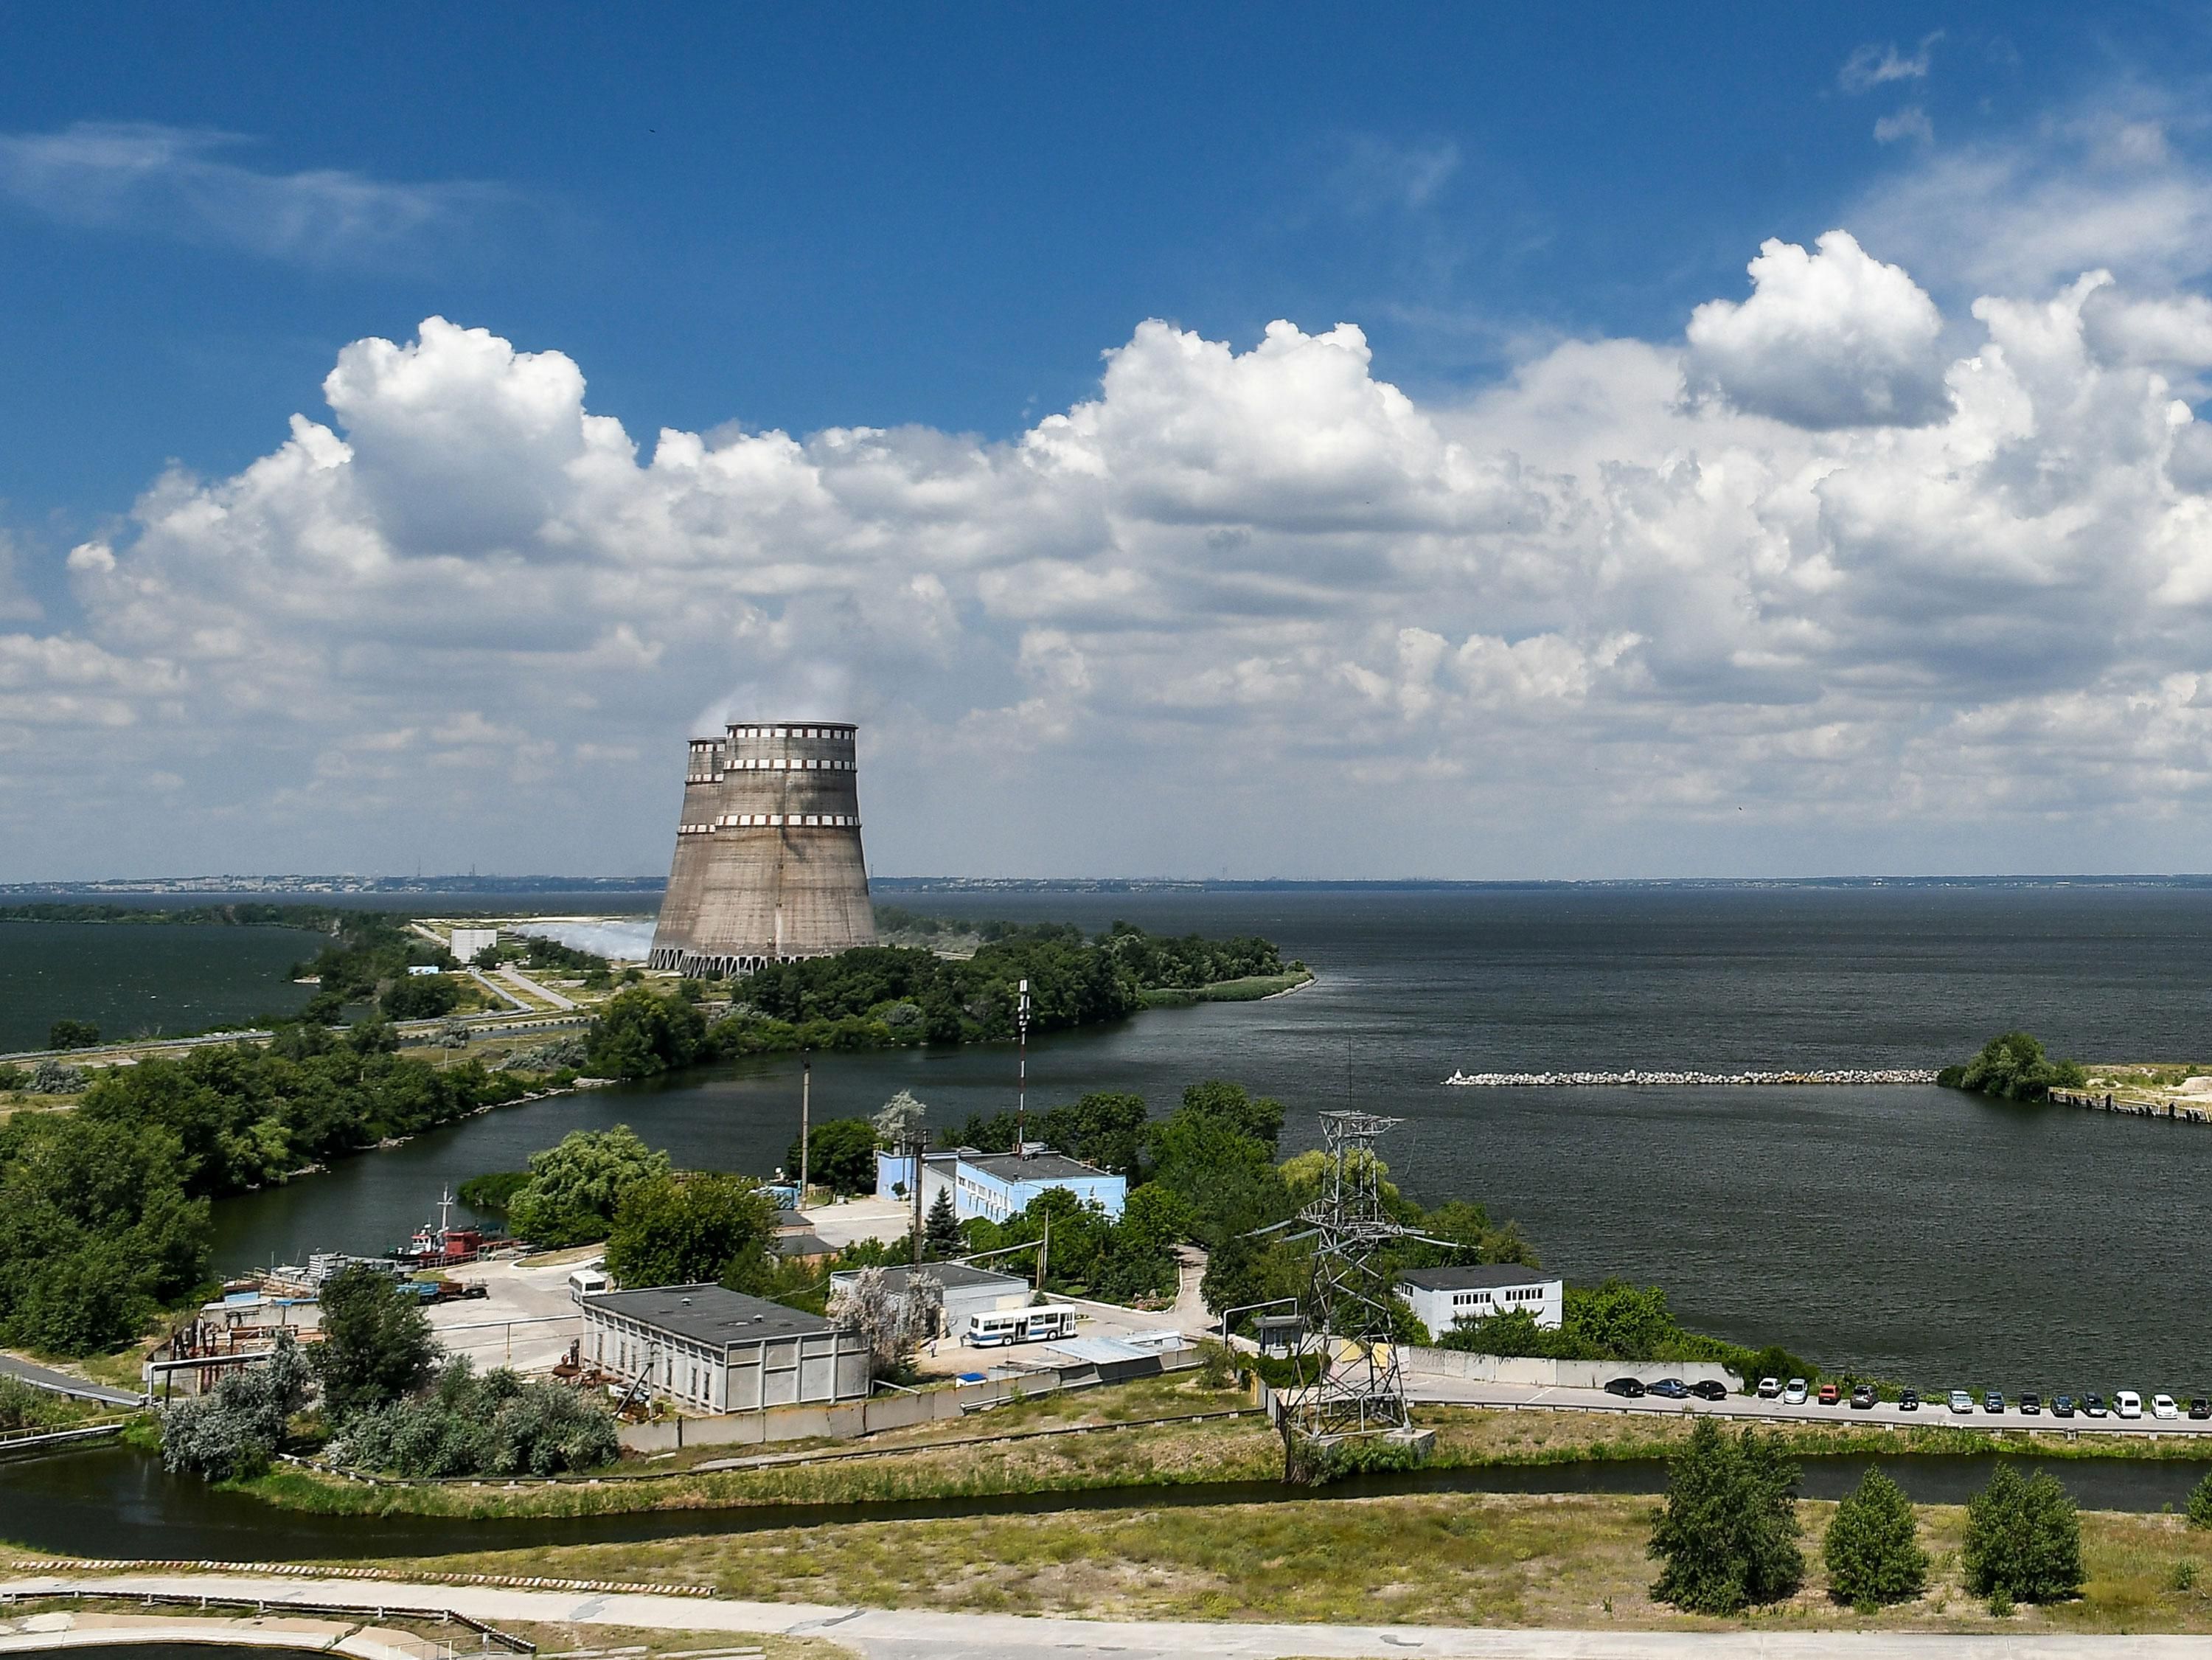 A nuclear power plant on the shore of a large body of water, with two tall conical towers in the middle of the facility